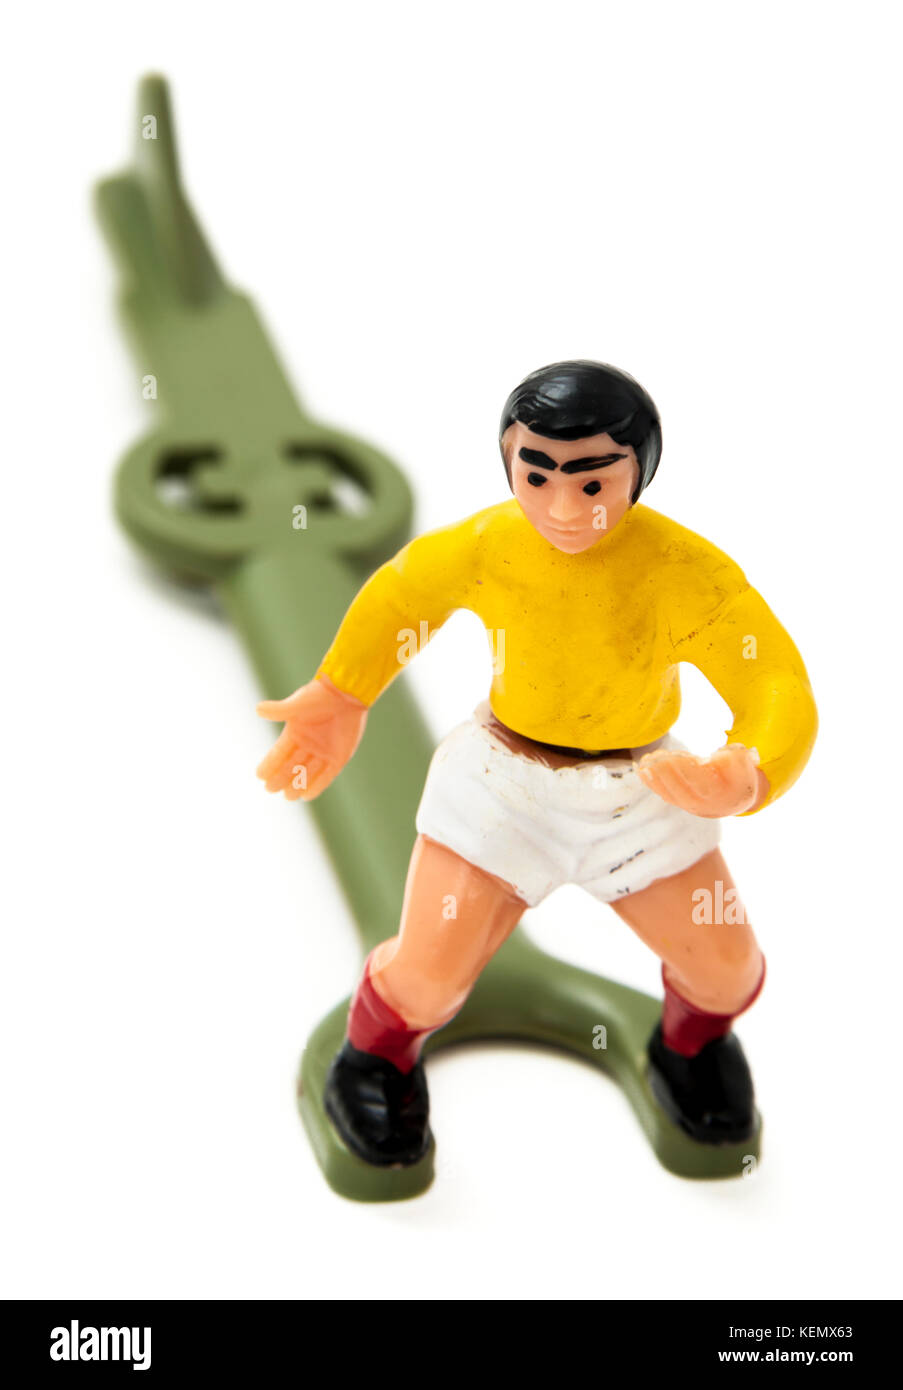 Goalkeeper from the vintage early 1970's 'Striker' tabletop football game by Parker, launched as a competitor to the popular Subbuteo game Stock Photo